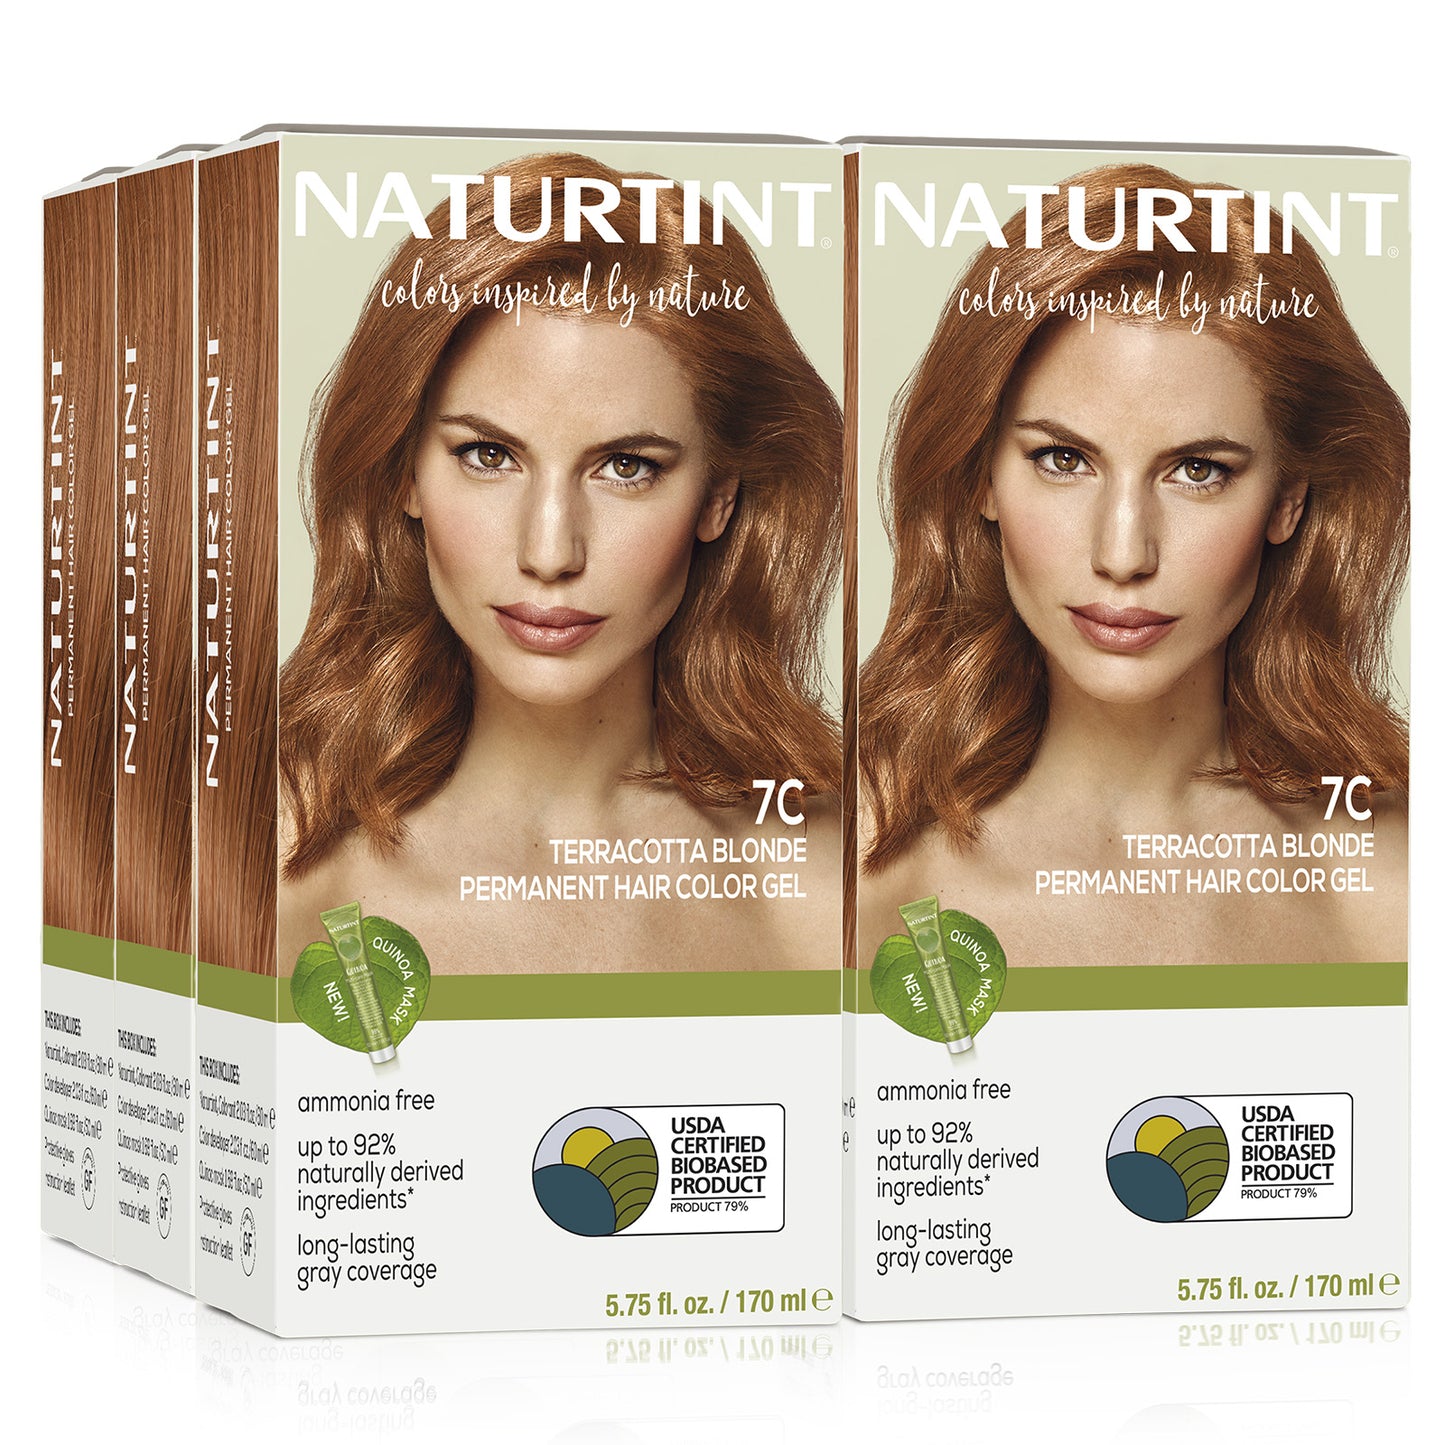 Naturtint Permanent Hair Color 7C Terracotta Blonde (Packaging may vary)